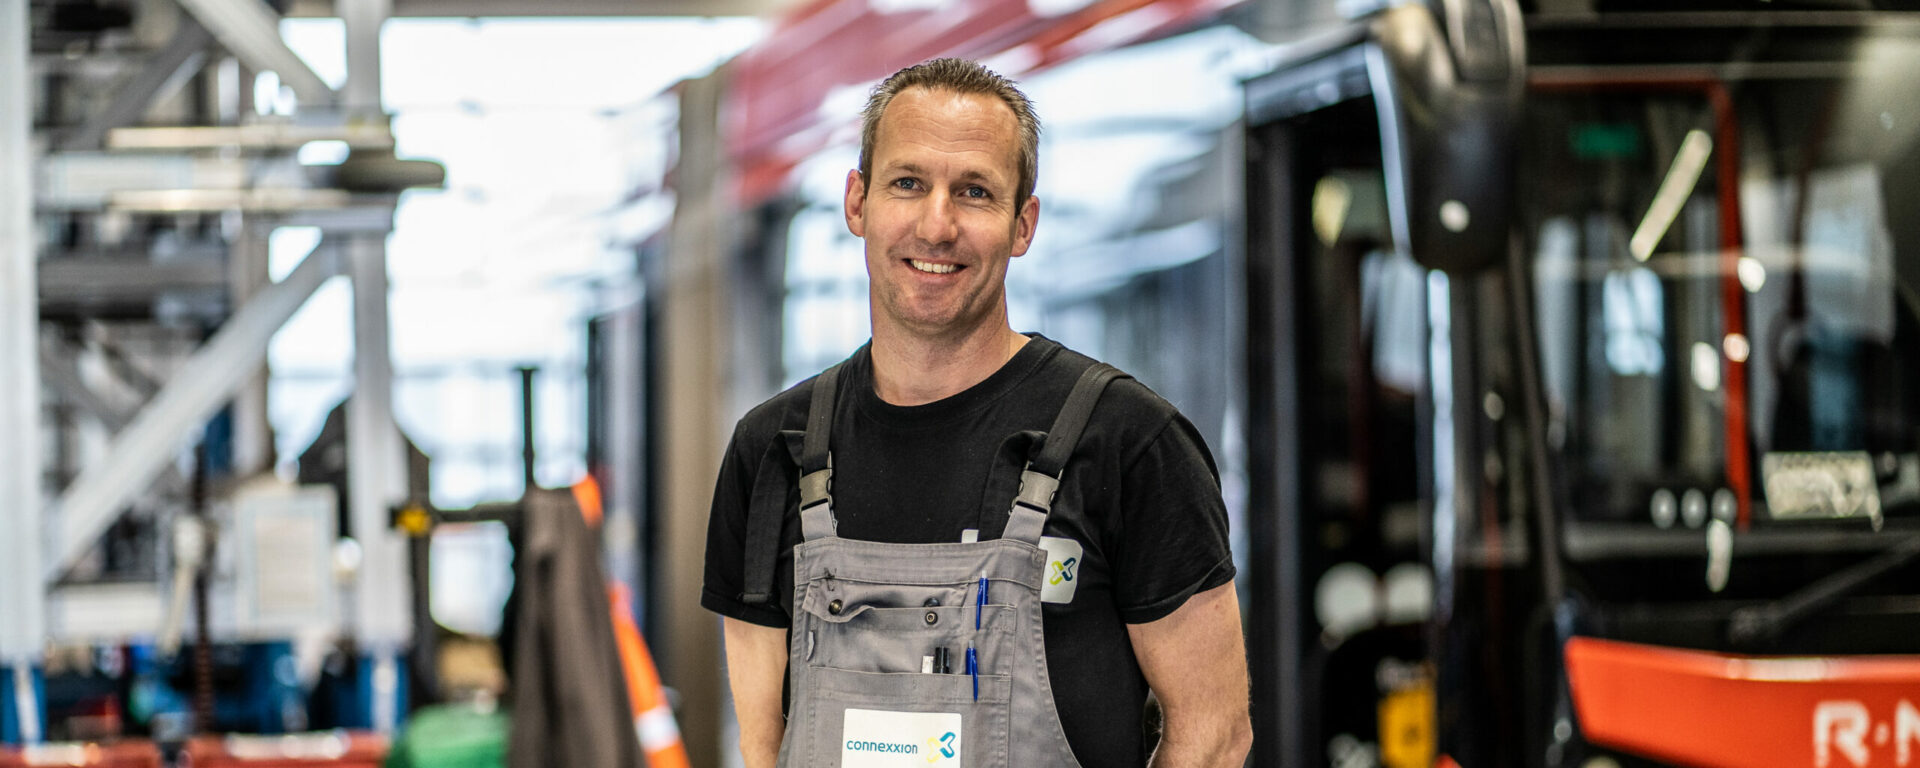 bart-leeflang-bus-mechanic-ready-future-sustainable-mobility